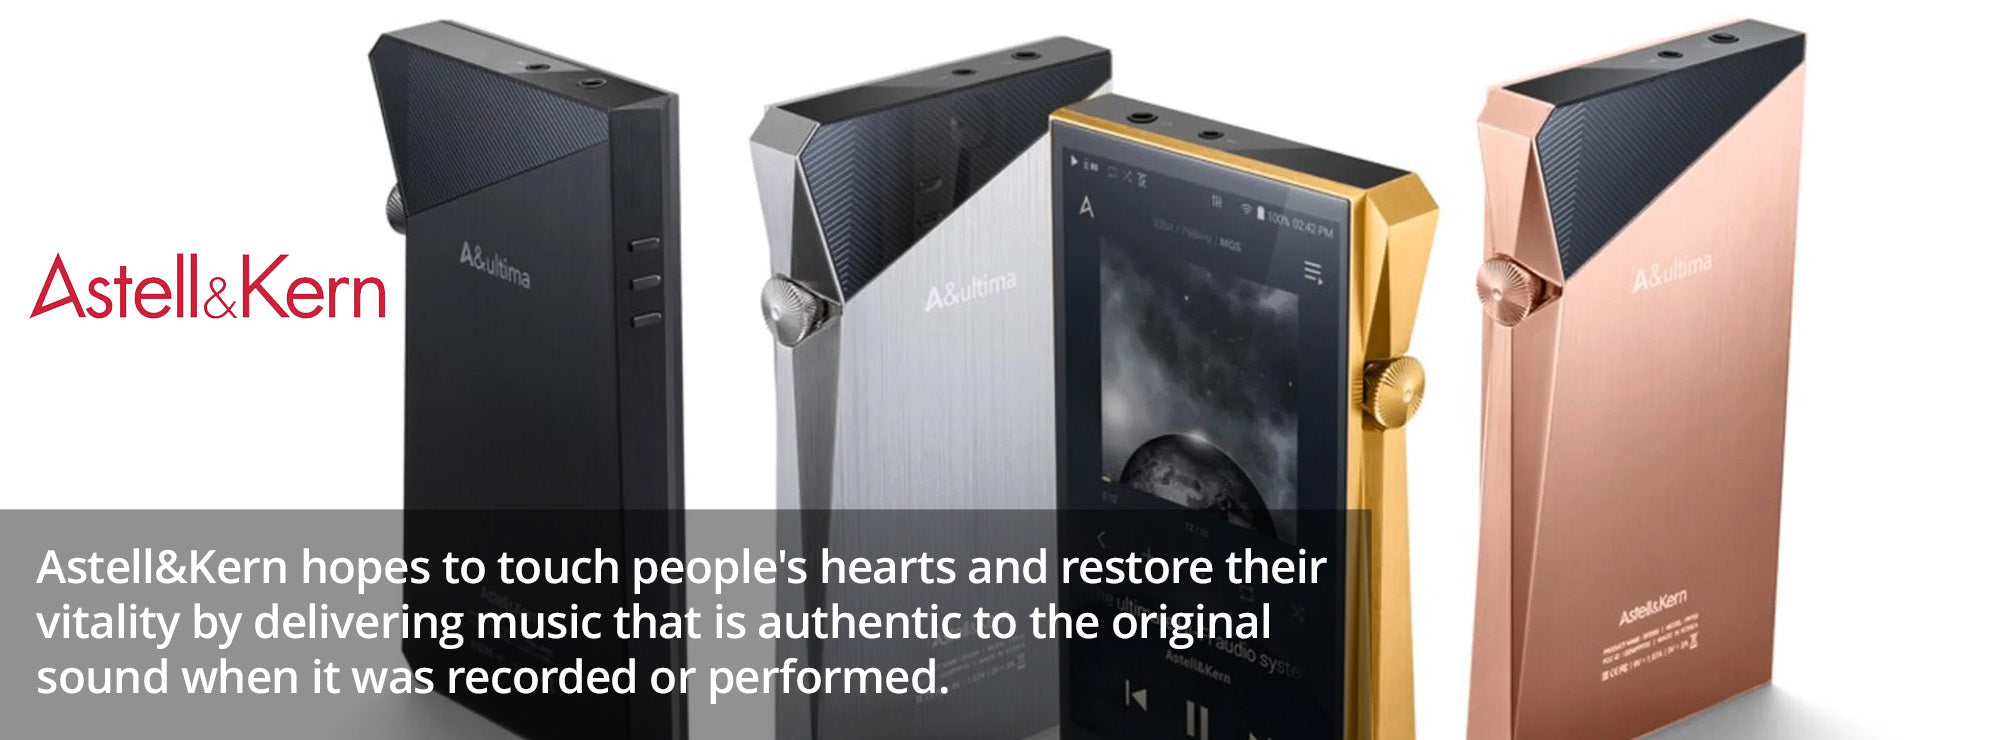 Astell&Kern hopes to touch people's hearts and restore their vitality by delivering music that is authentic to the original sound when it was recorded or performed. 